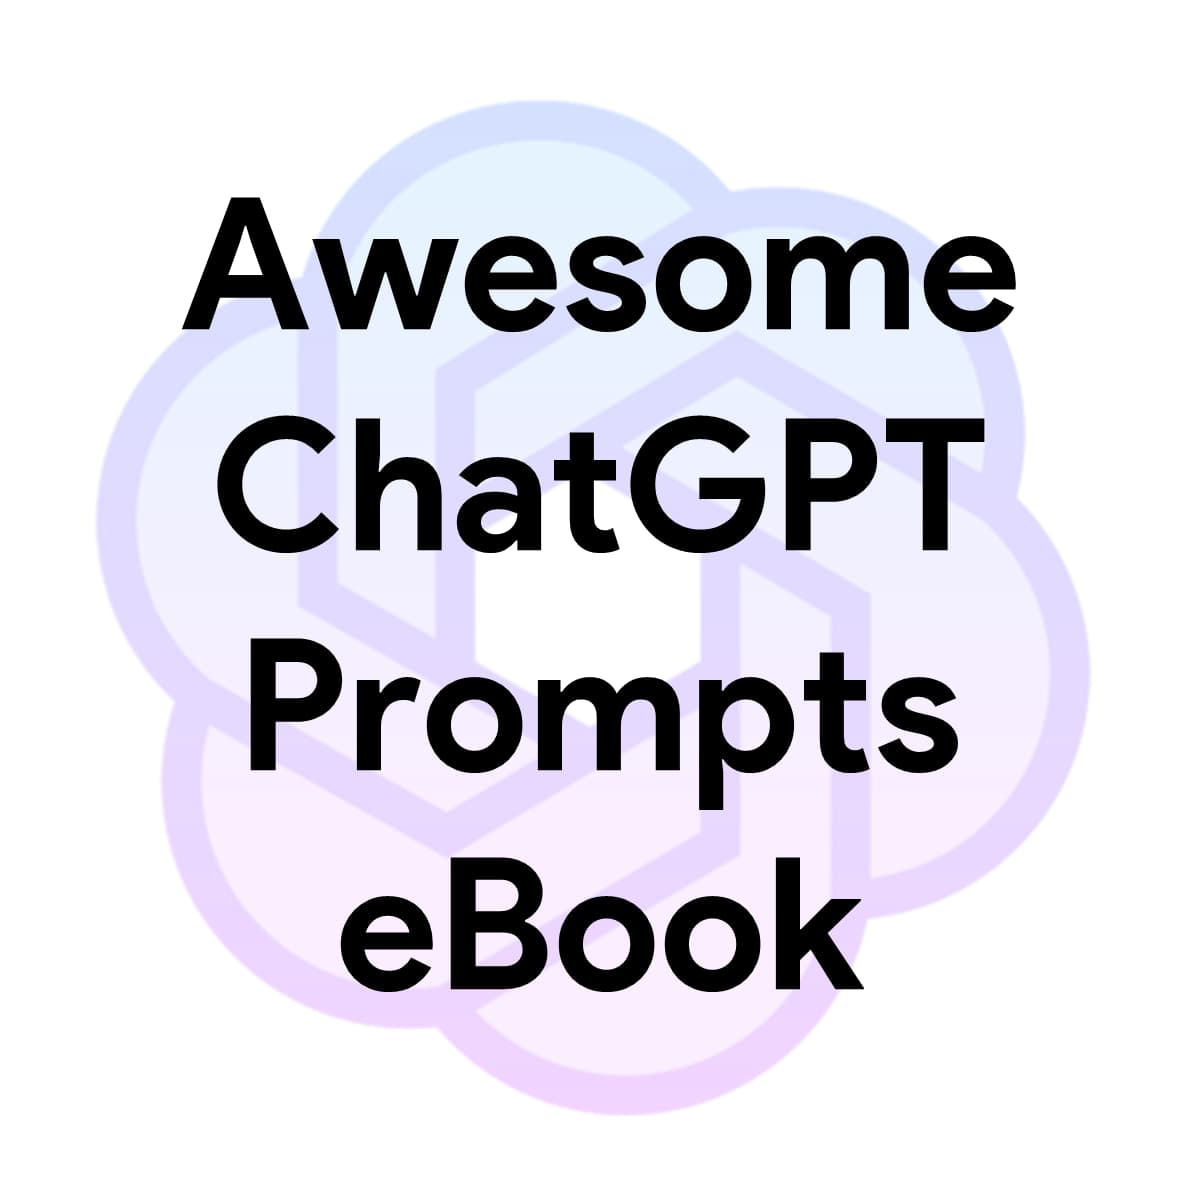 Hi Everyone, We've created an eBook Version of Awesome ChatGPT Prompts (GitHub Repo by @fkadev) for AI and ChatGPT Enthusiasts. Try it and Please share your feedback in the comments. Download PDF for Free from the link given in the next tweet. #ChatGPT #AI #Prompts